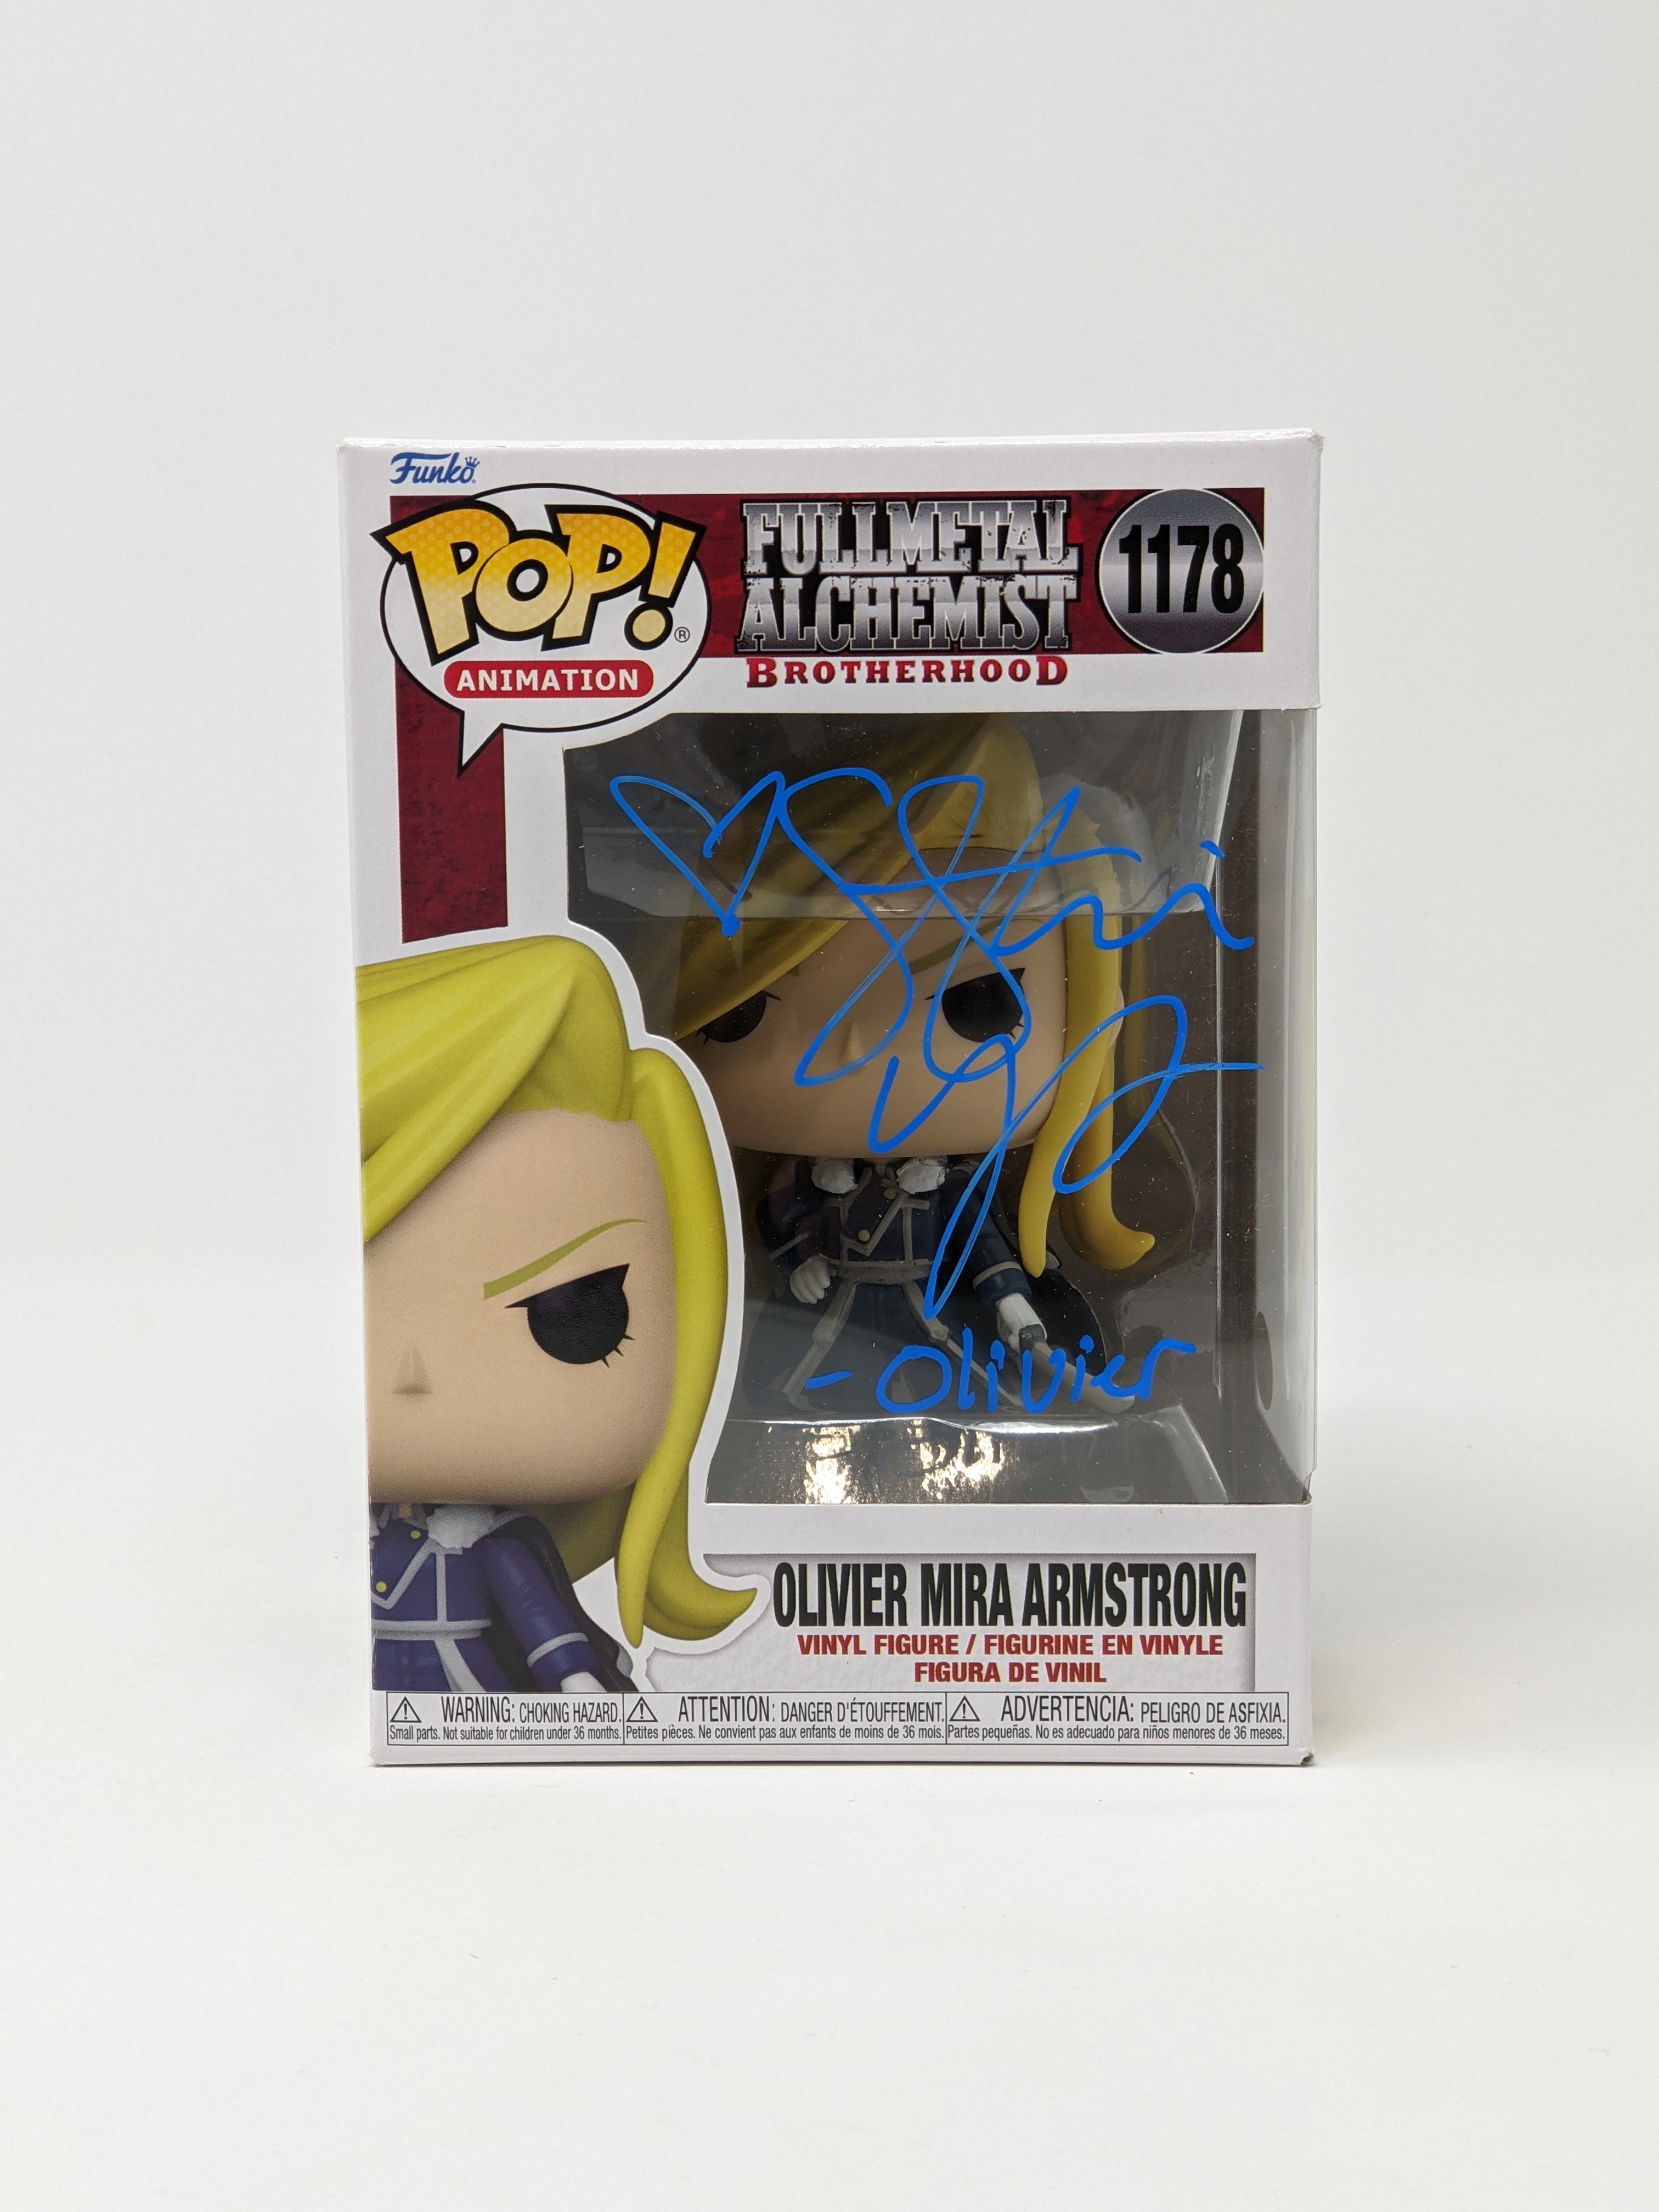 Stephanie Young Fullmetal Alchemist Oliver Mira Armstrong #1178 Signed Funko Pop JSA COA Certified Autograph GalaxyCon